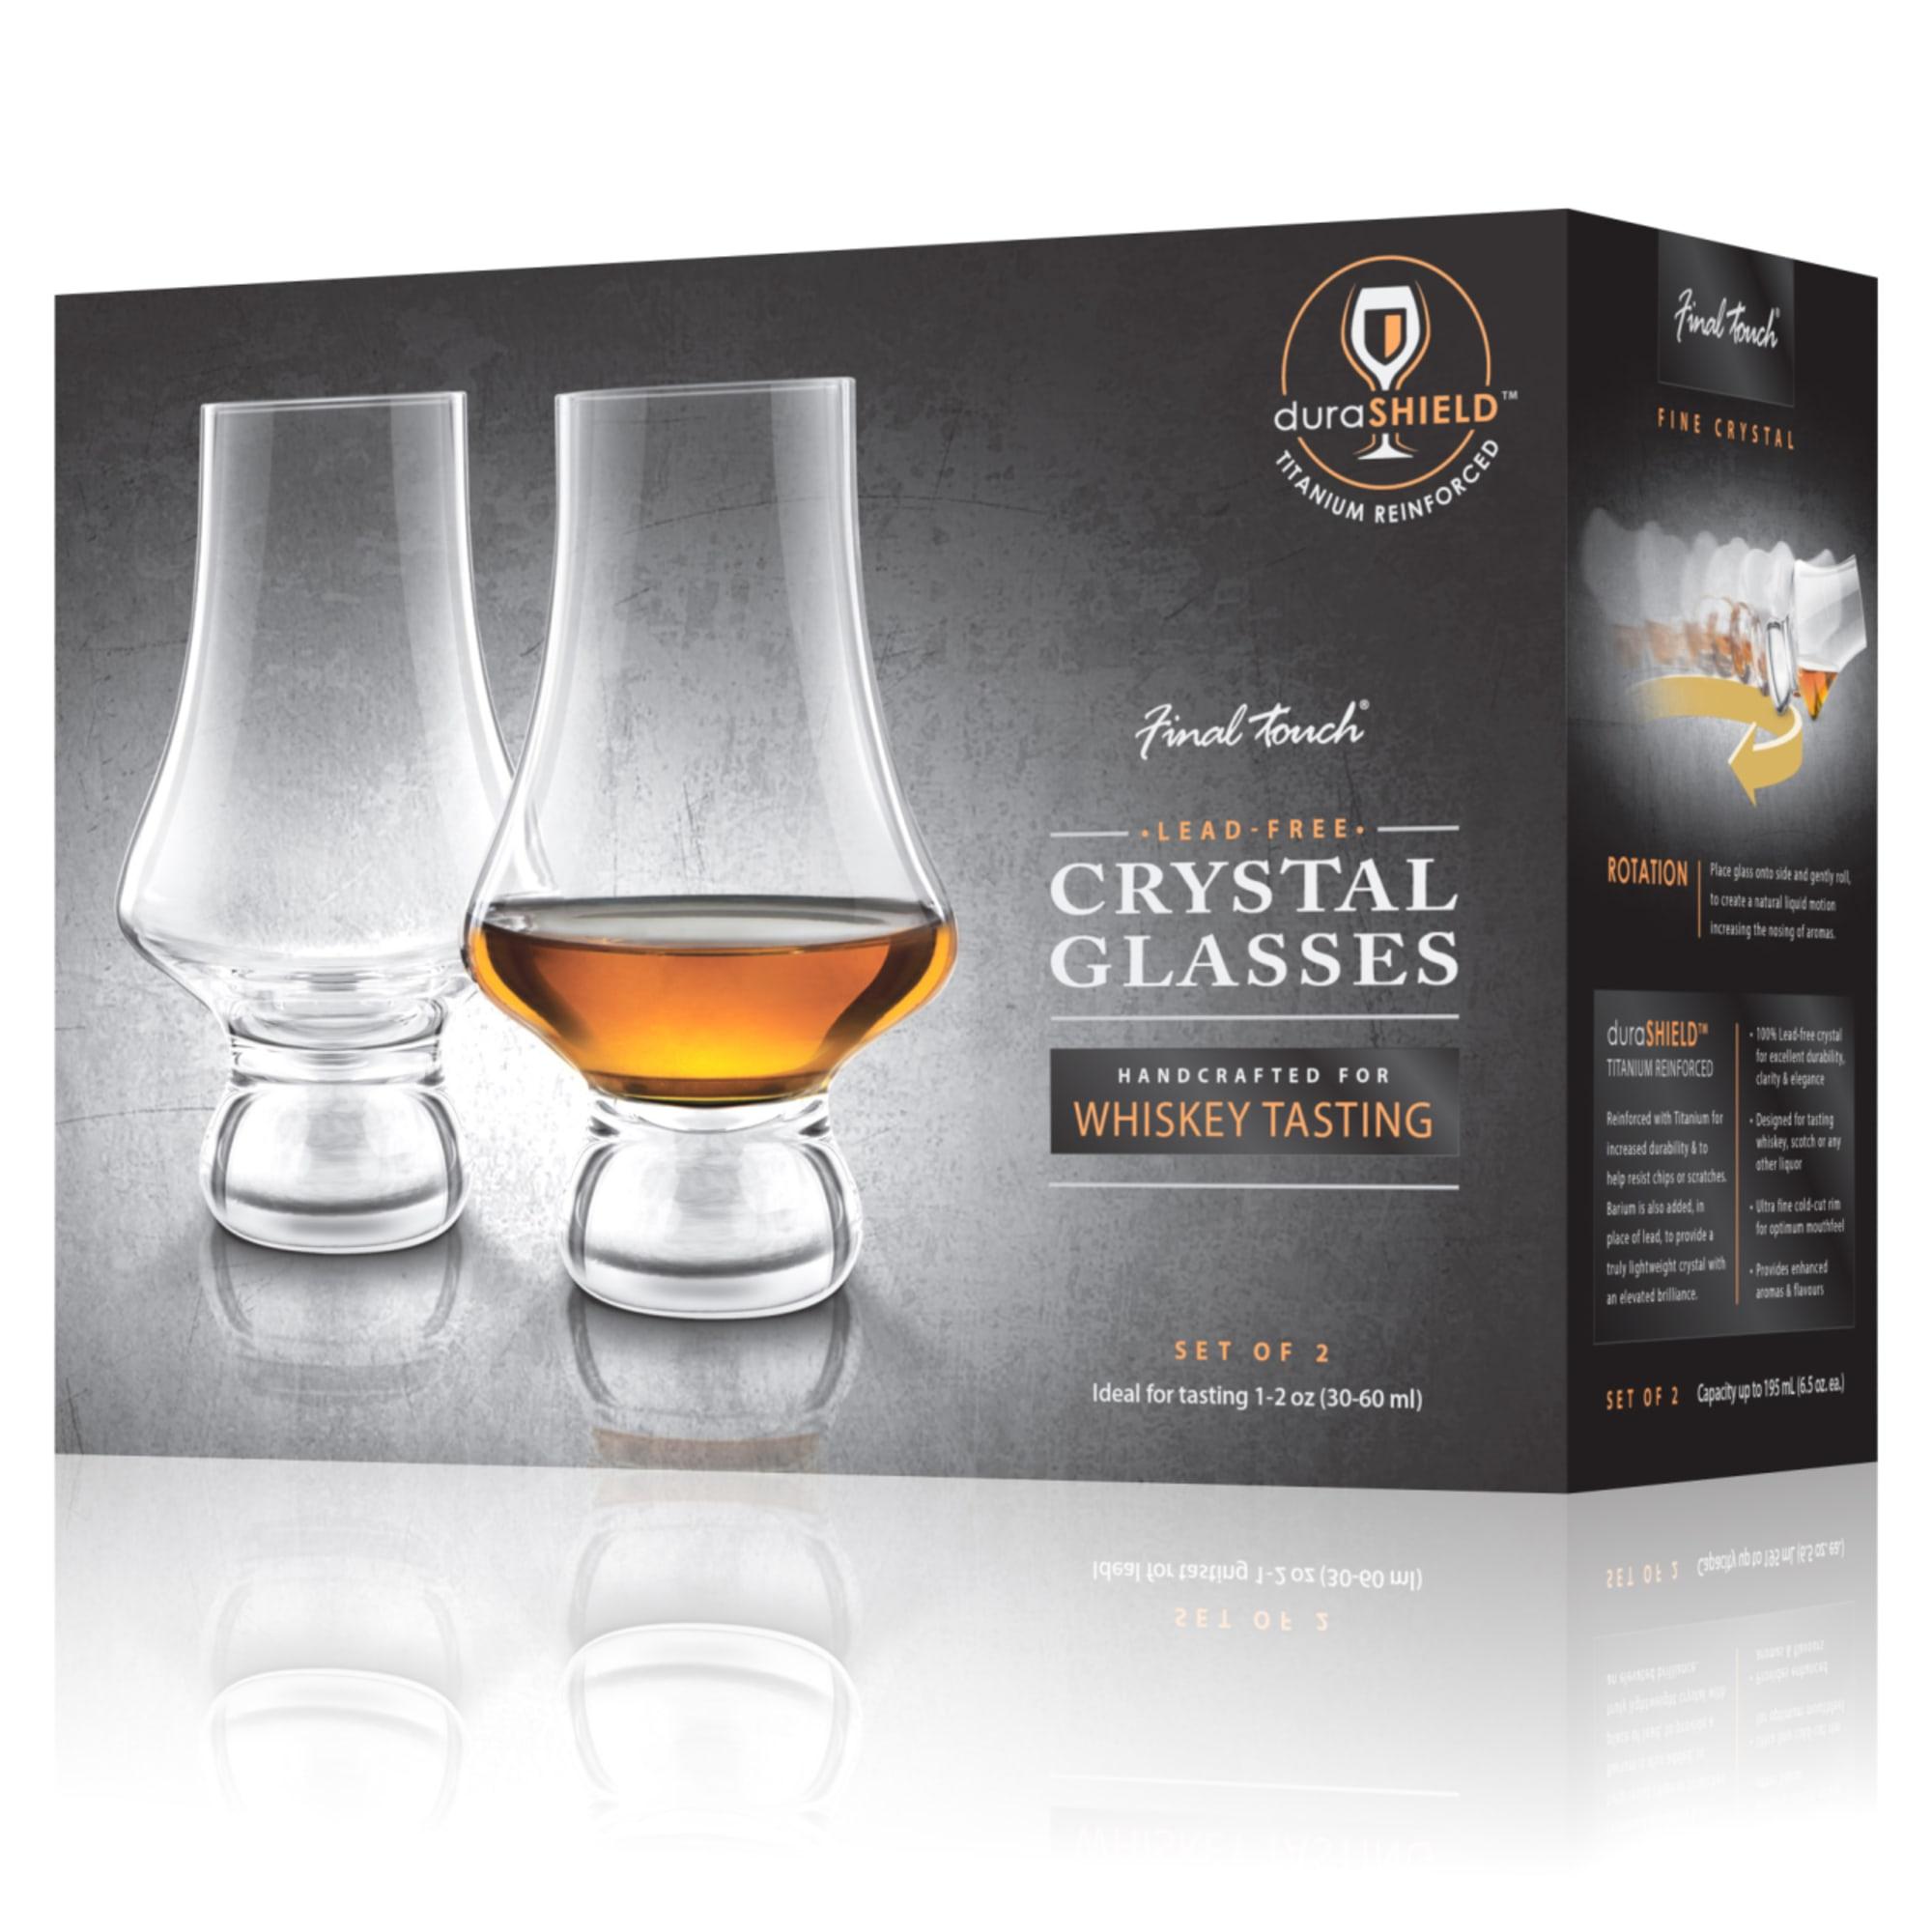 Final Touch Whiskey Tasting Glass 195ml Set of 2 Image 5